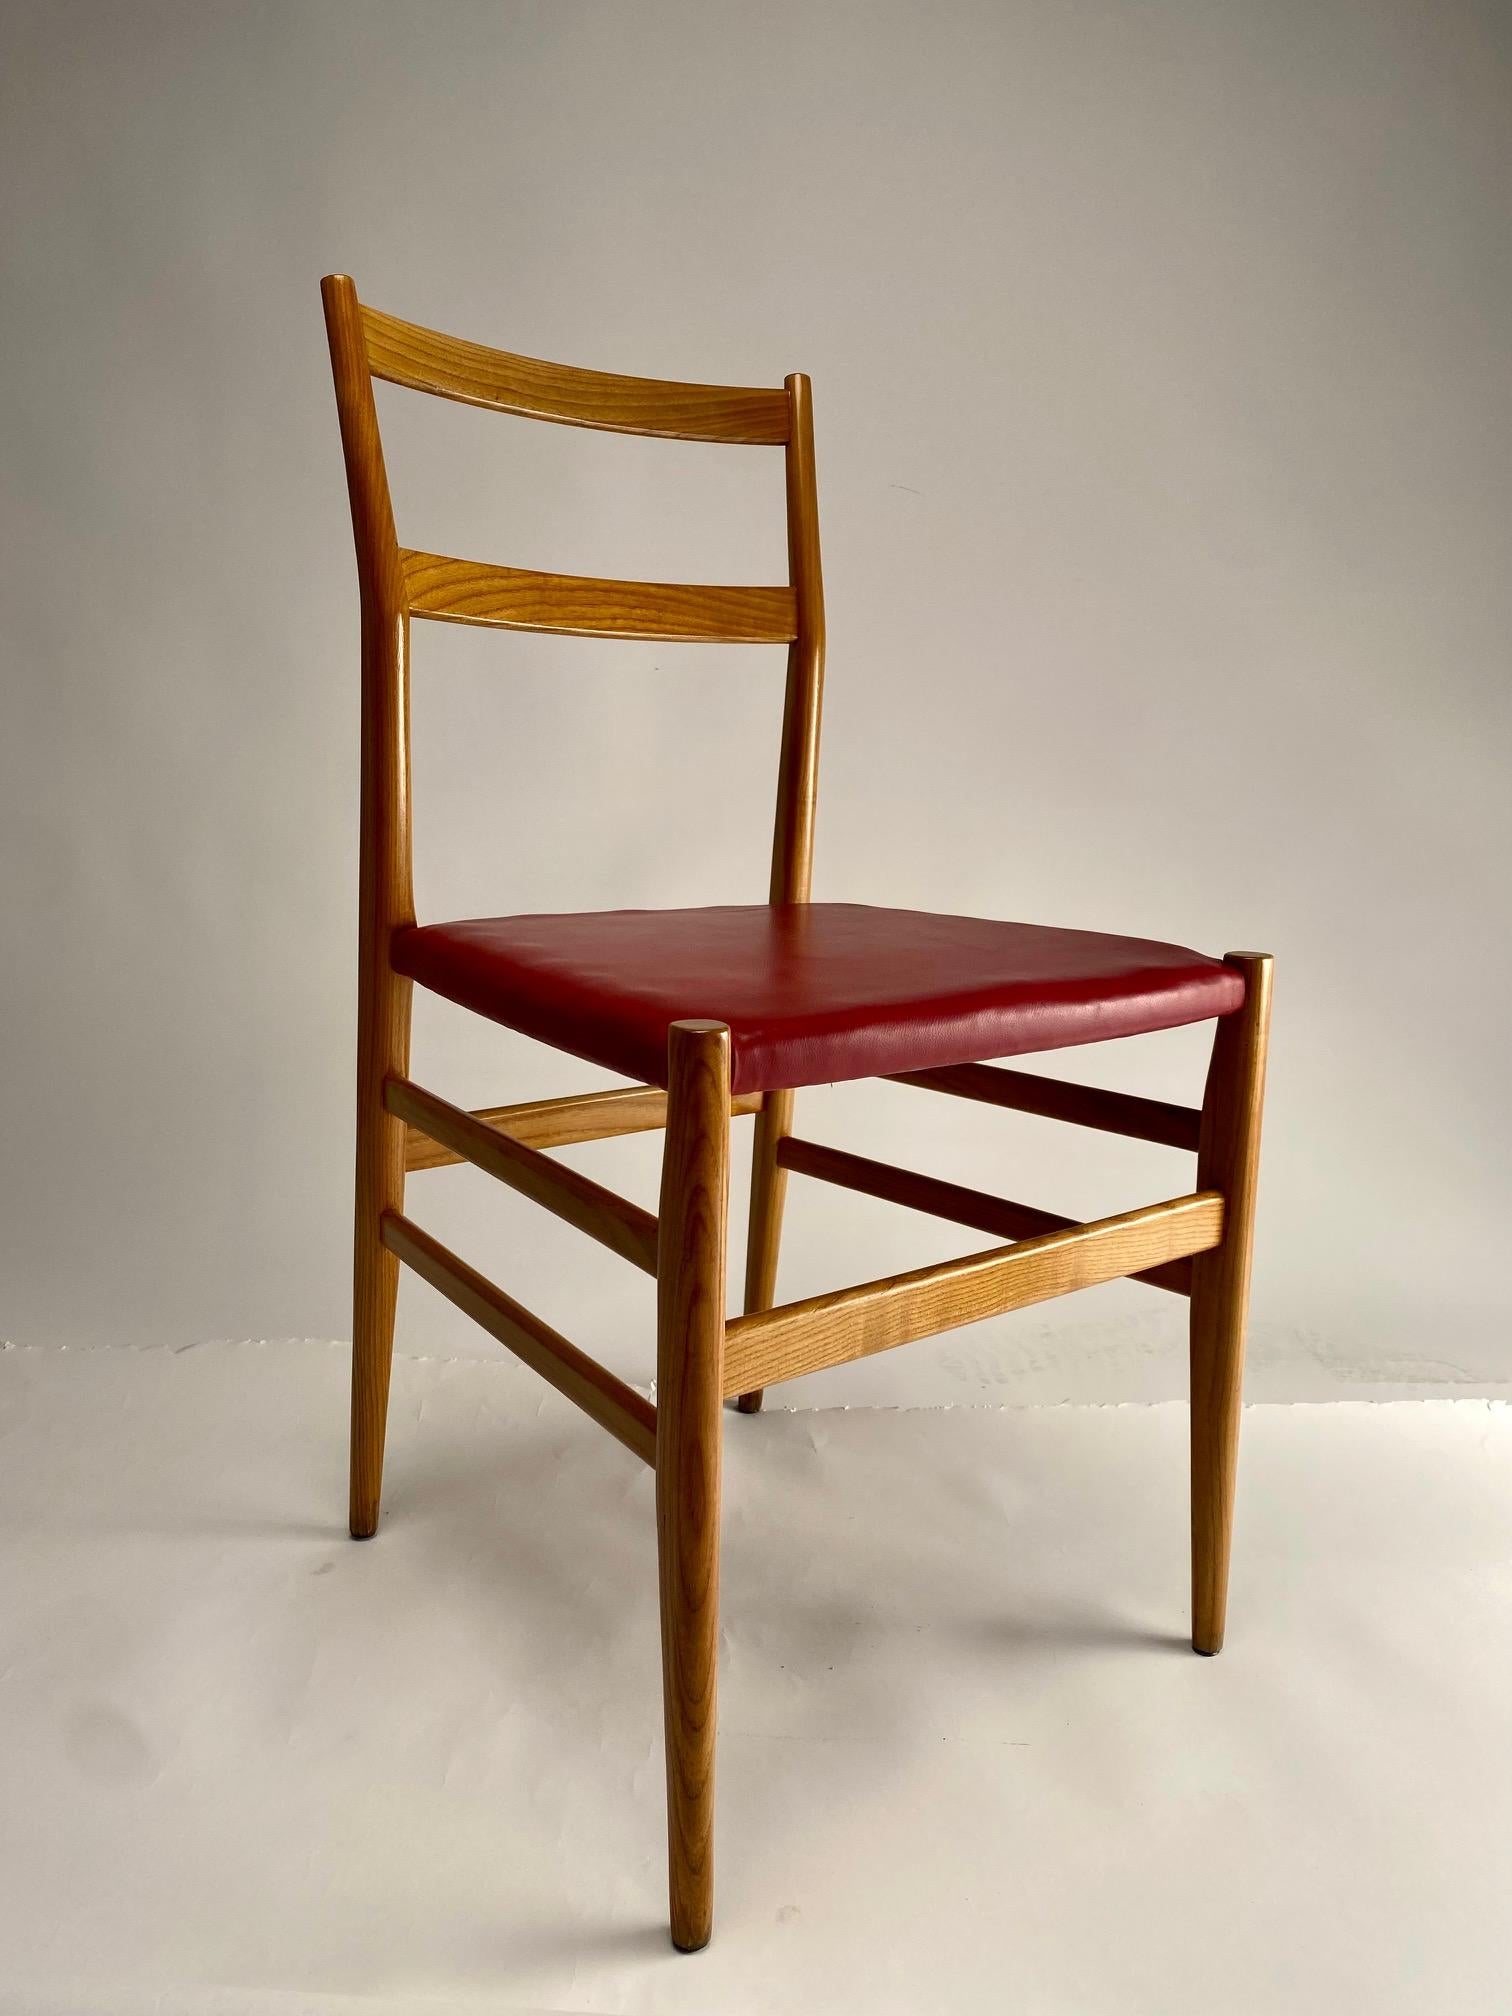 Leggera is the chair designed in 1952 by Gio Ponti in collaboration with Cesare Cassina and the company's artisans. An icon of Made in Italy design that represents the wooden chair par excellence, still very current today.

Eclectic, refined, with